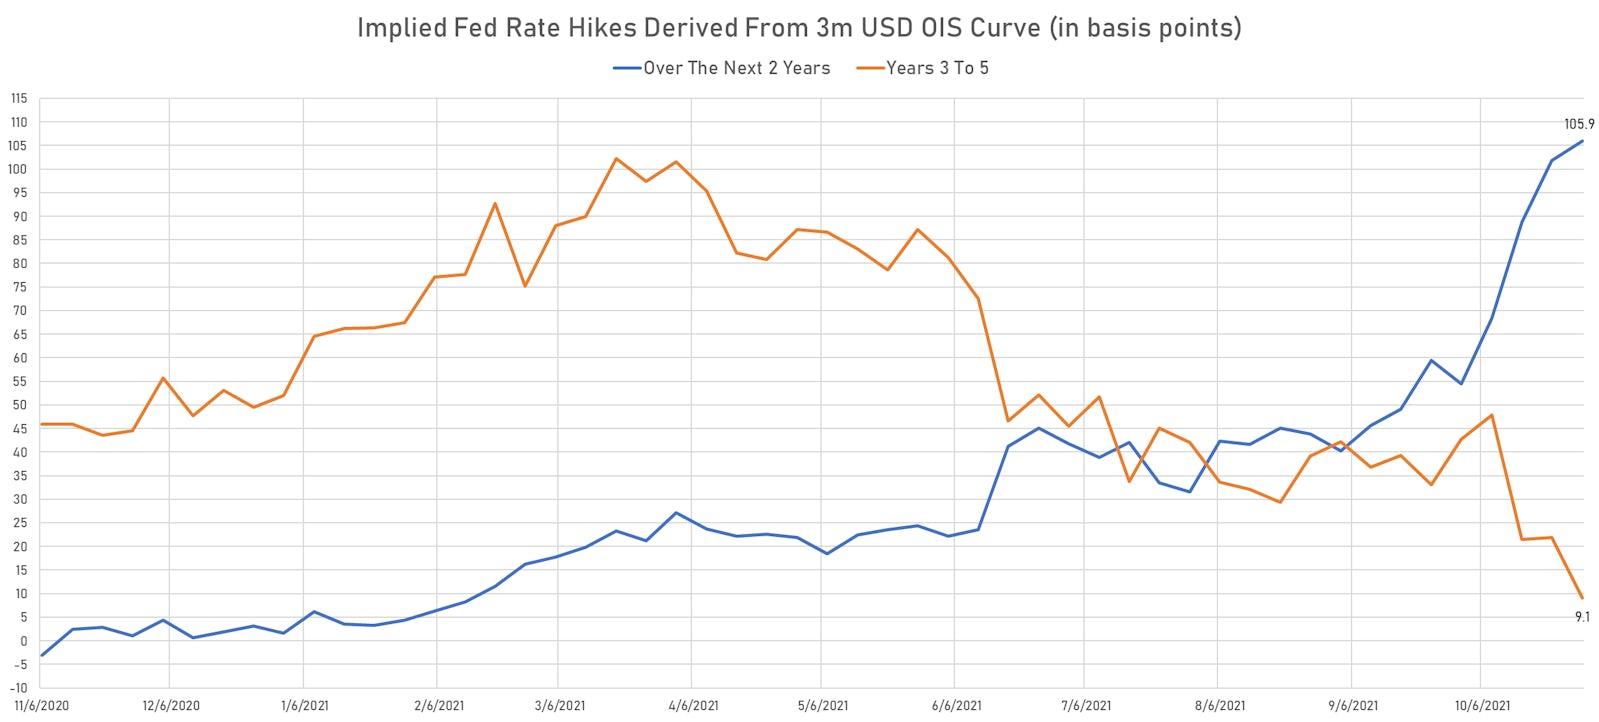 Implied Fed Rate Hikes Priced Into The 3-Month USD OIS Forward Curve (weekly prices) | Sources: ϕpost, Refinitiv data